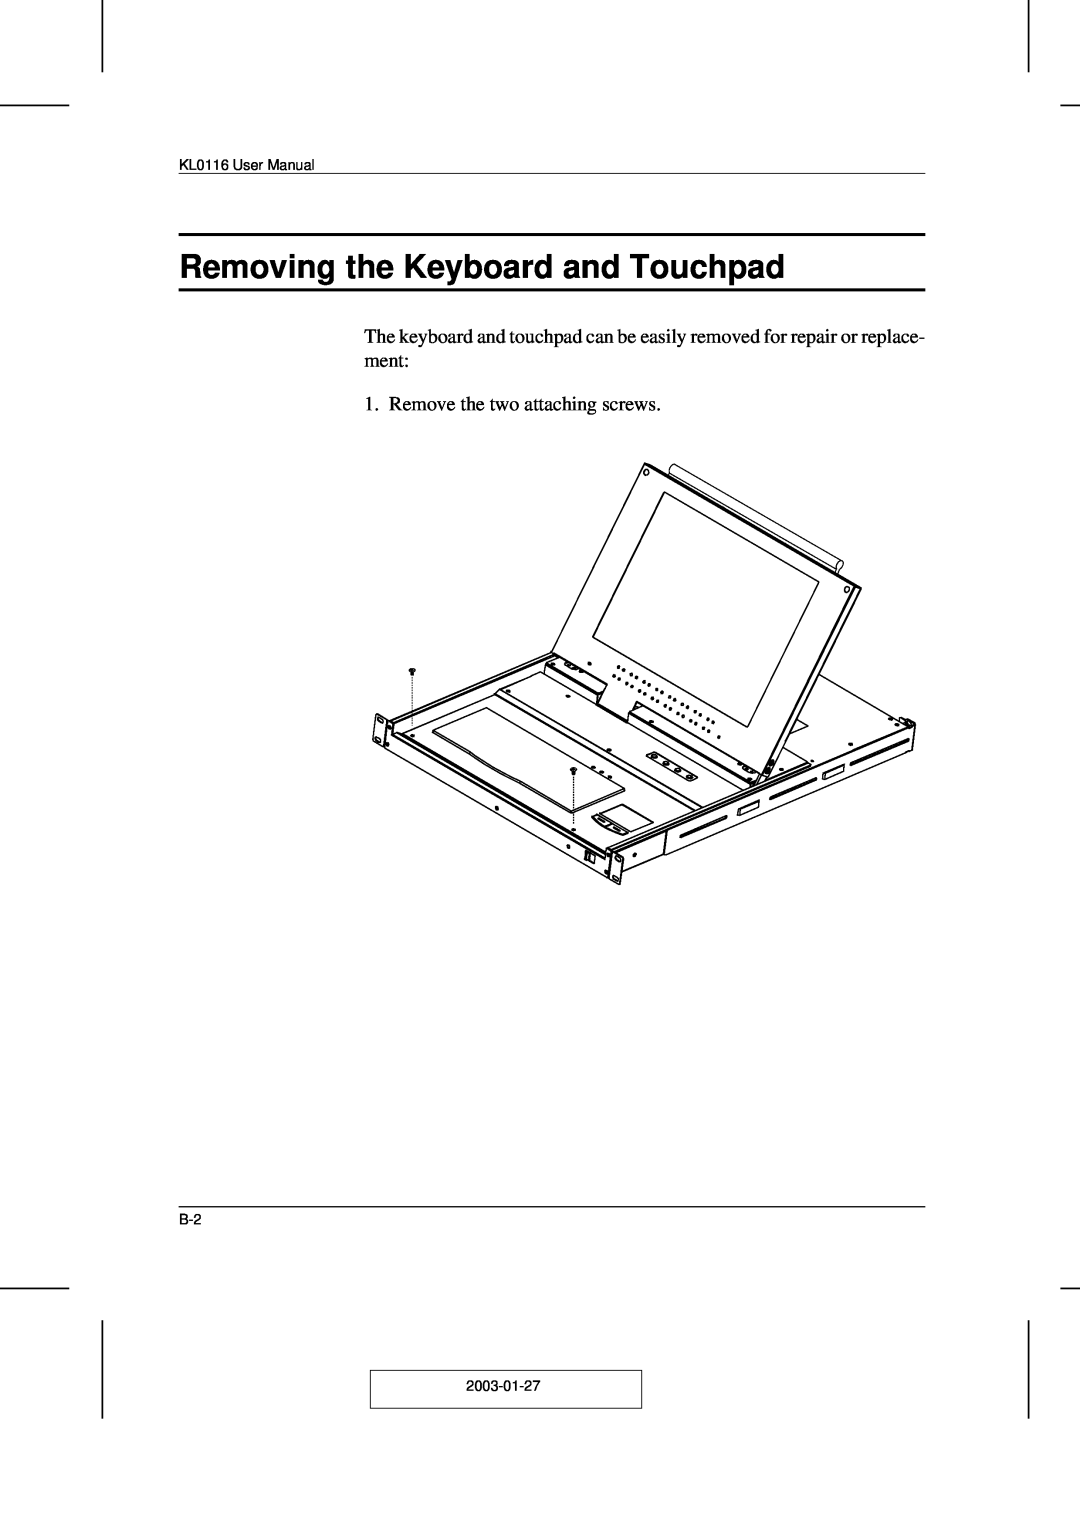 ATEN Technology ACS-1208AL, ACS-1216AL user manual Removing the Keyboard and Touchpad, Remove the two attaching screws 